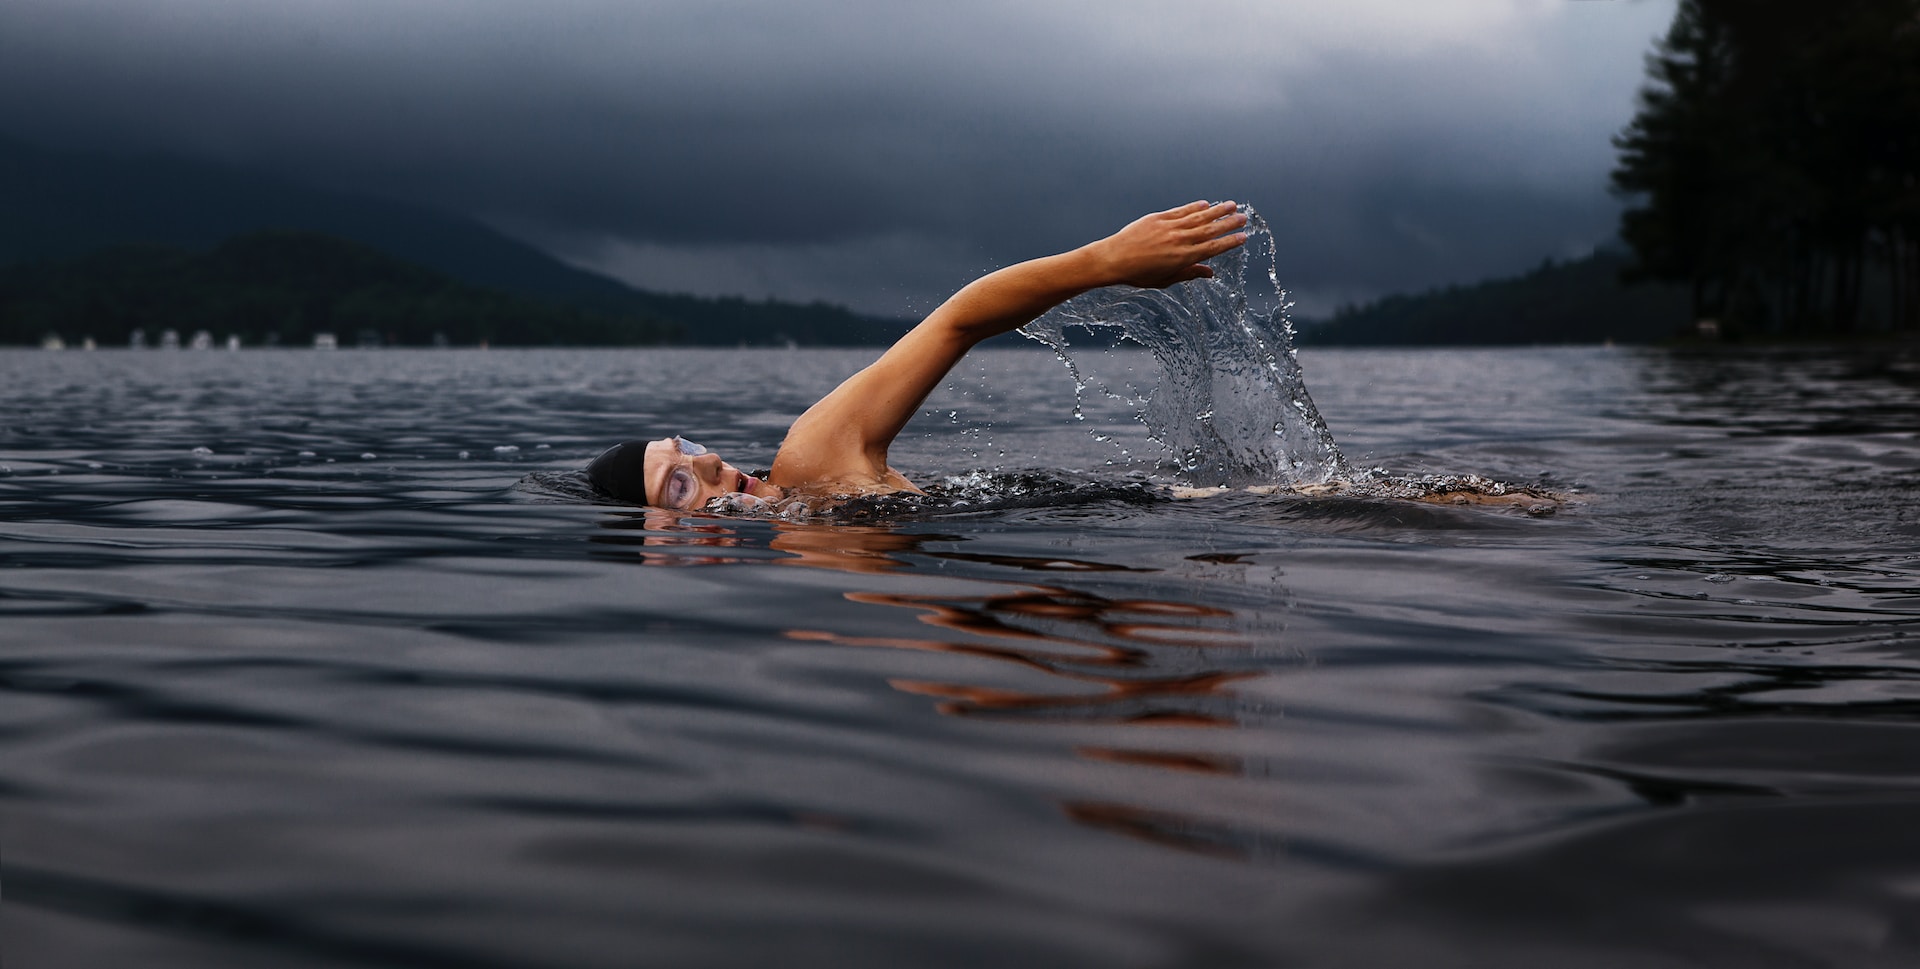 How to Swim a Mile for Triathlons? A 6-step guide